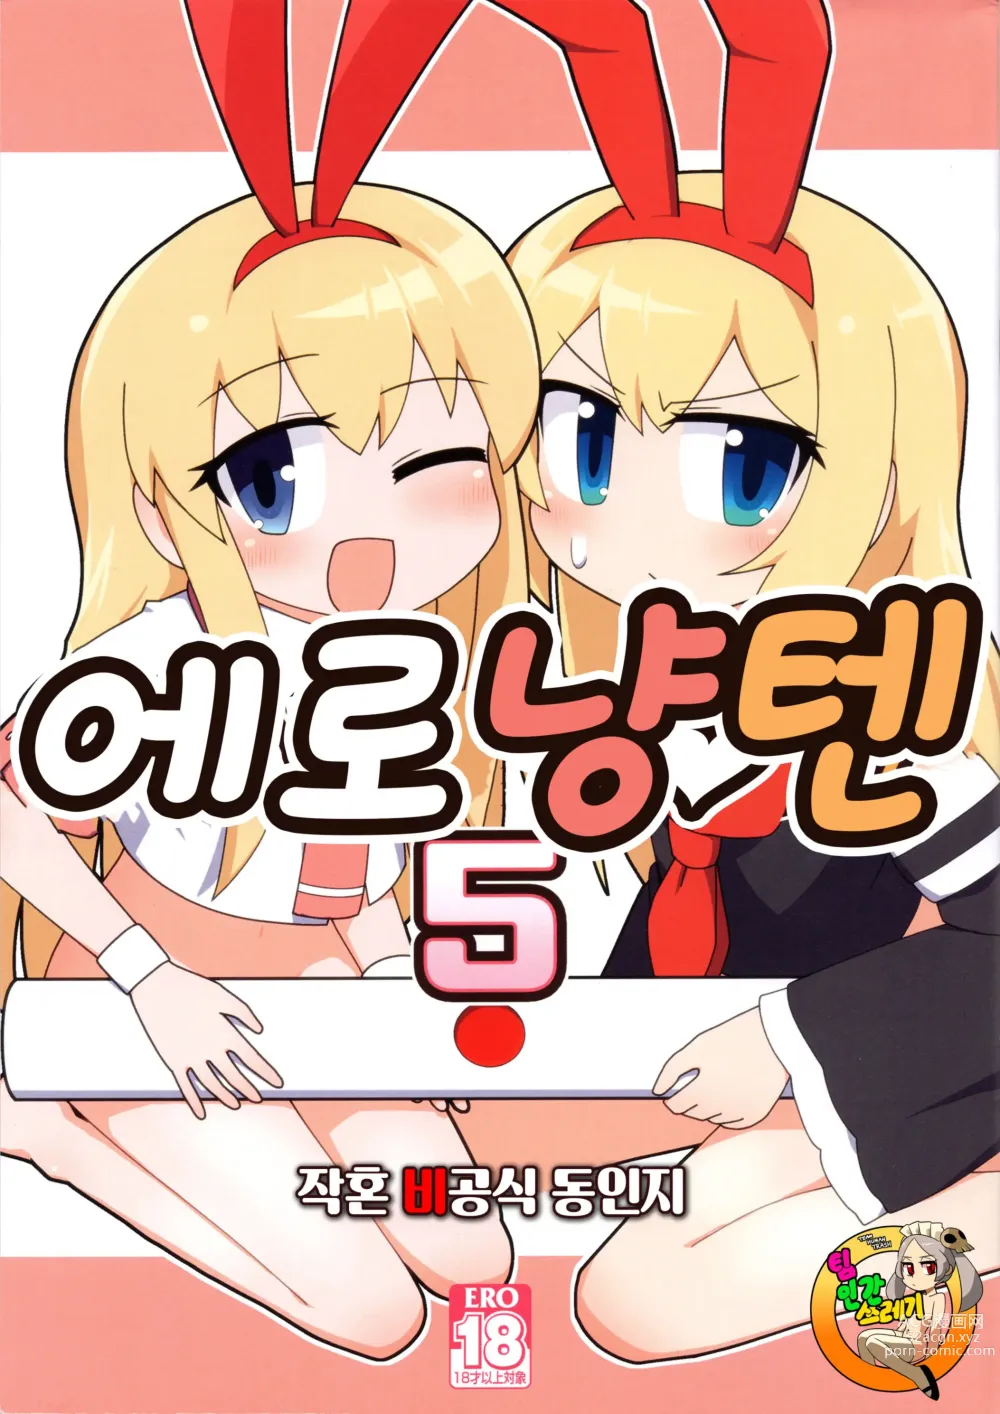 Page 1 of doujinshi 에로냥텐 5